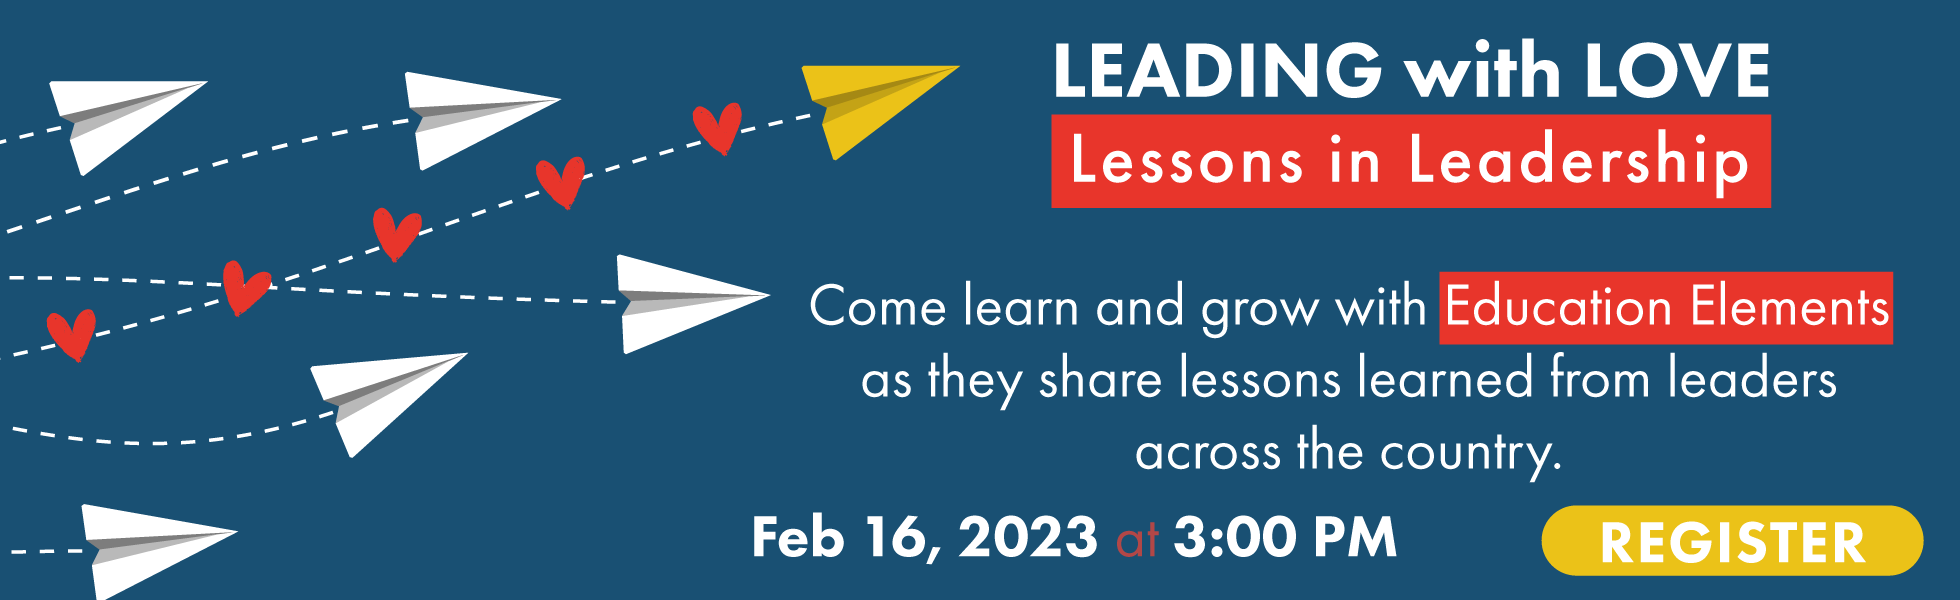 Come learn and grow with Education Elements as we share lessons learned from leaders across the country. Feb 16, 203. Click on image to register.